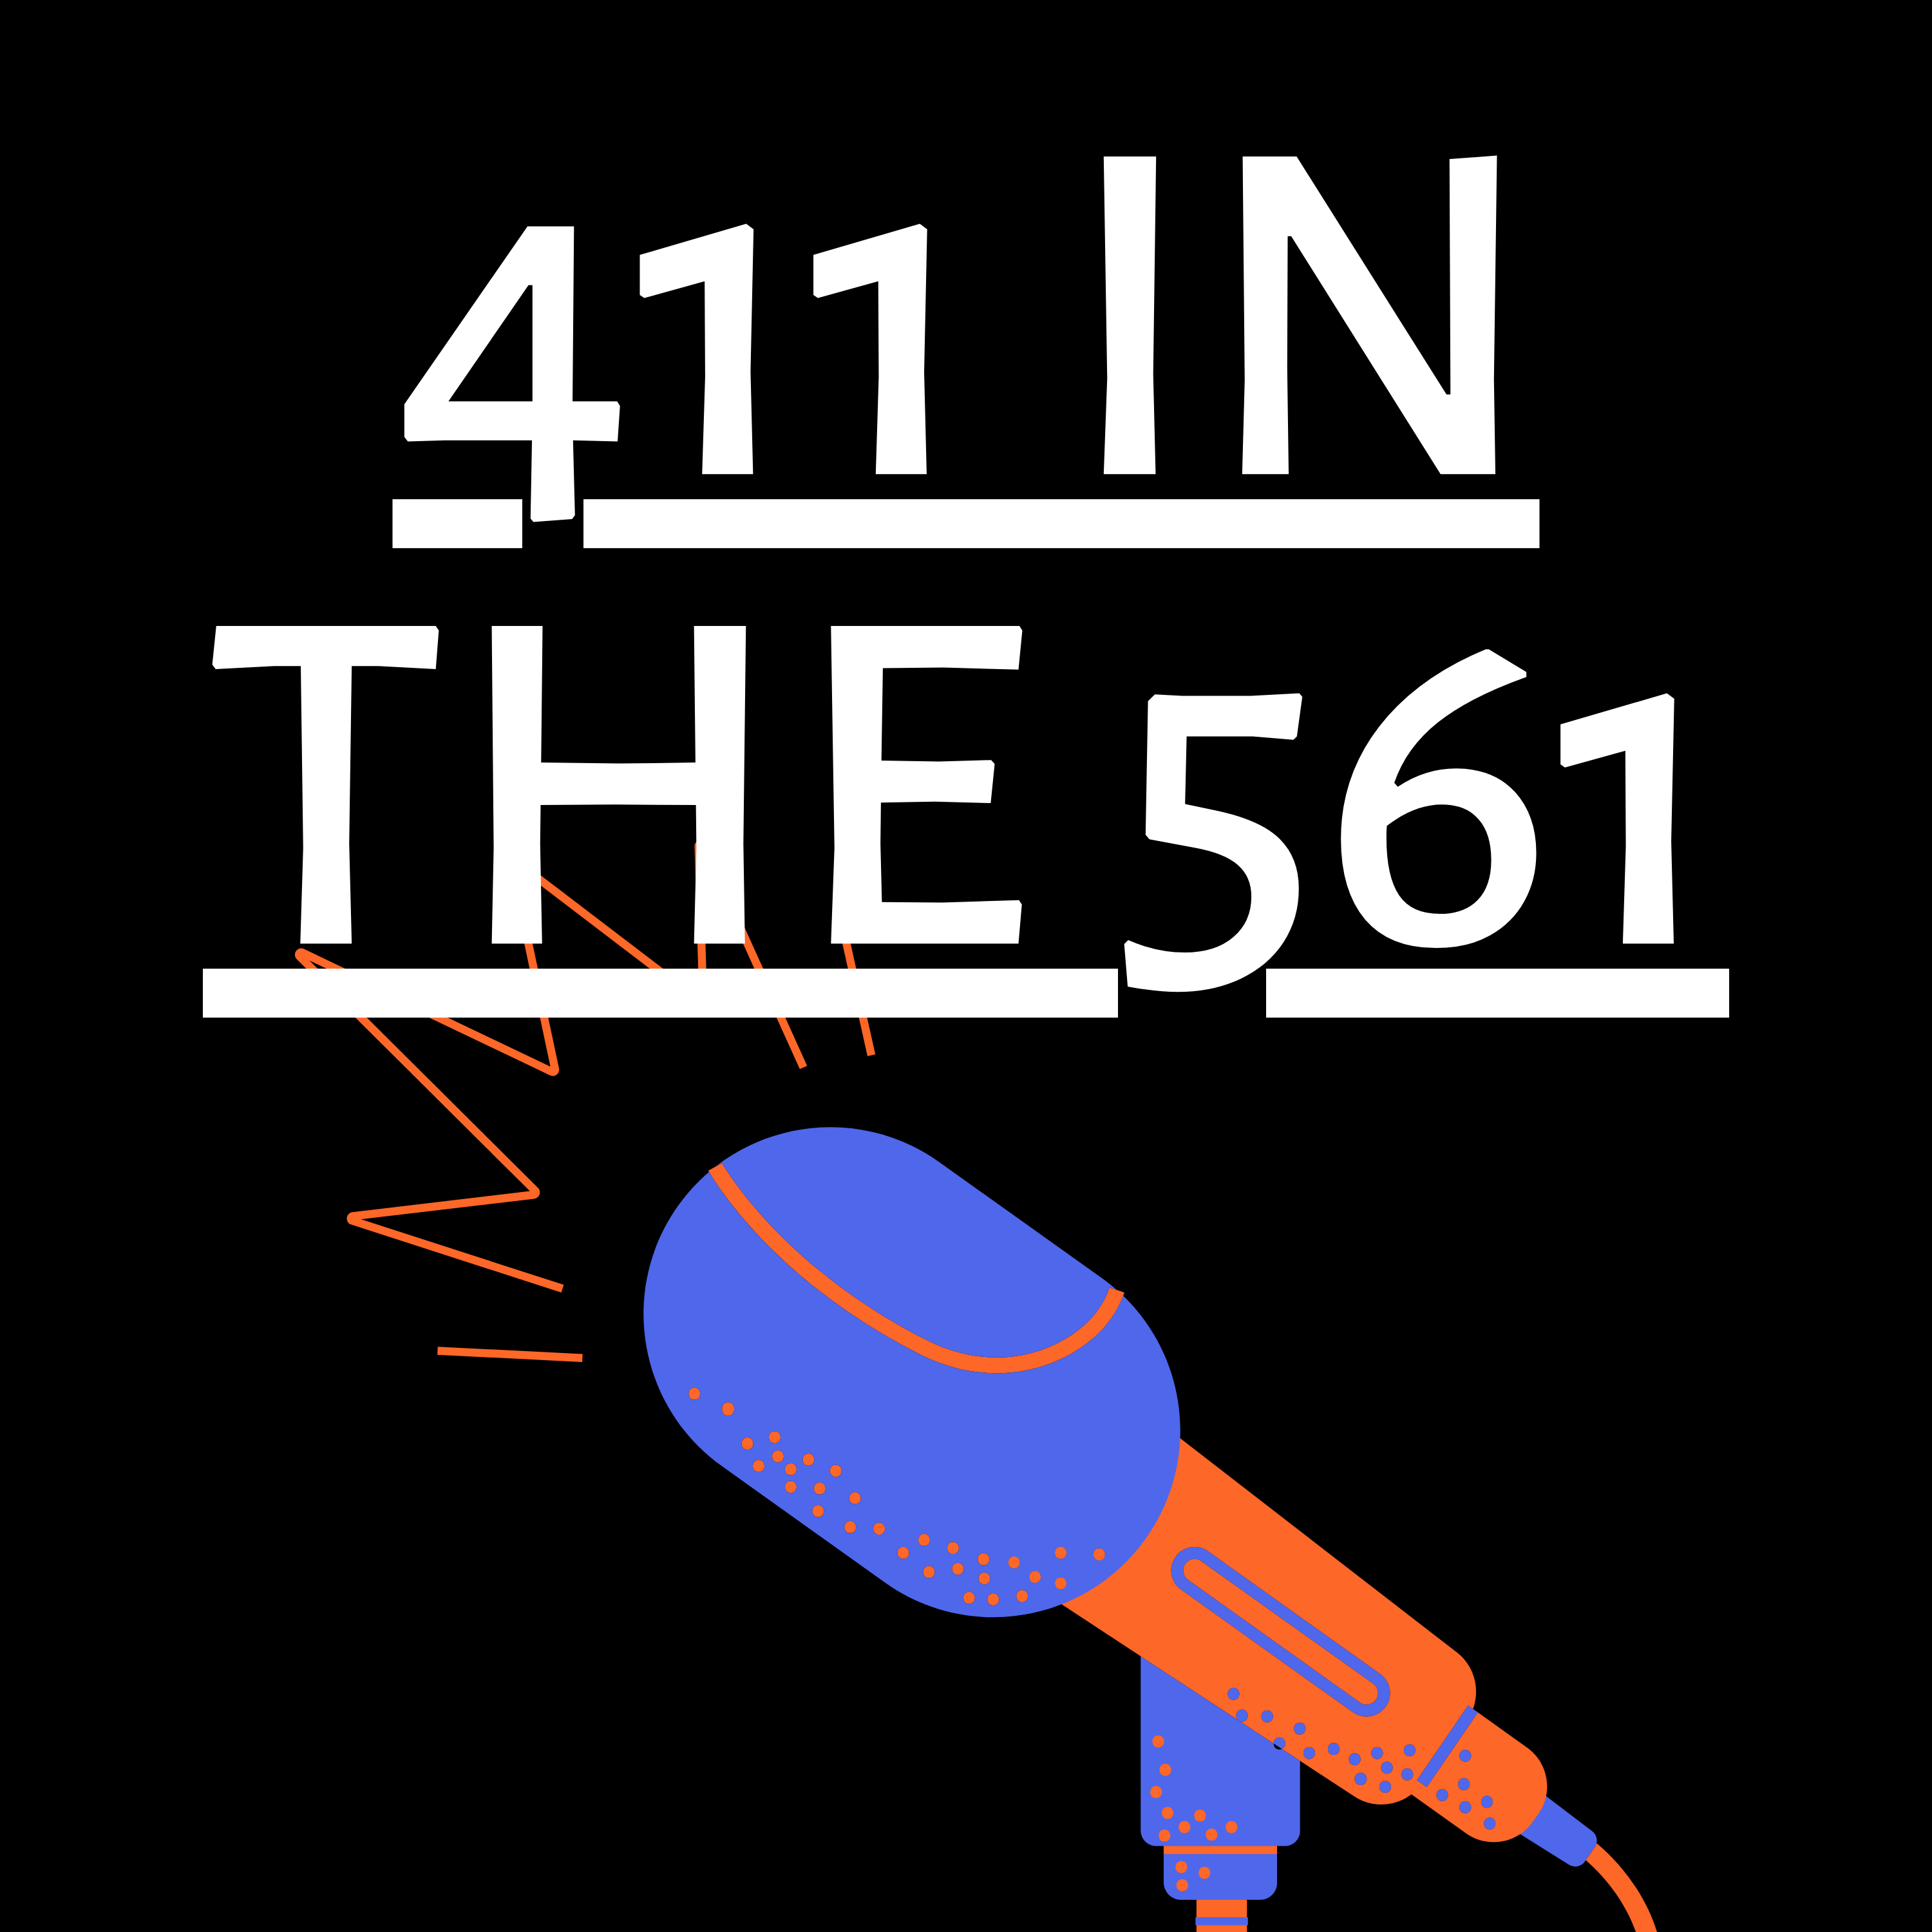 Artwork for 411 in the 561